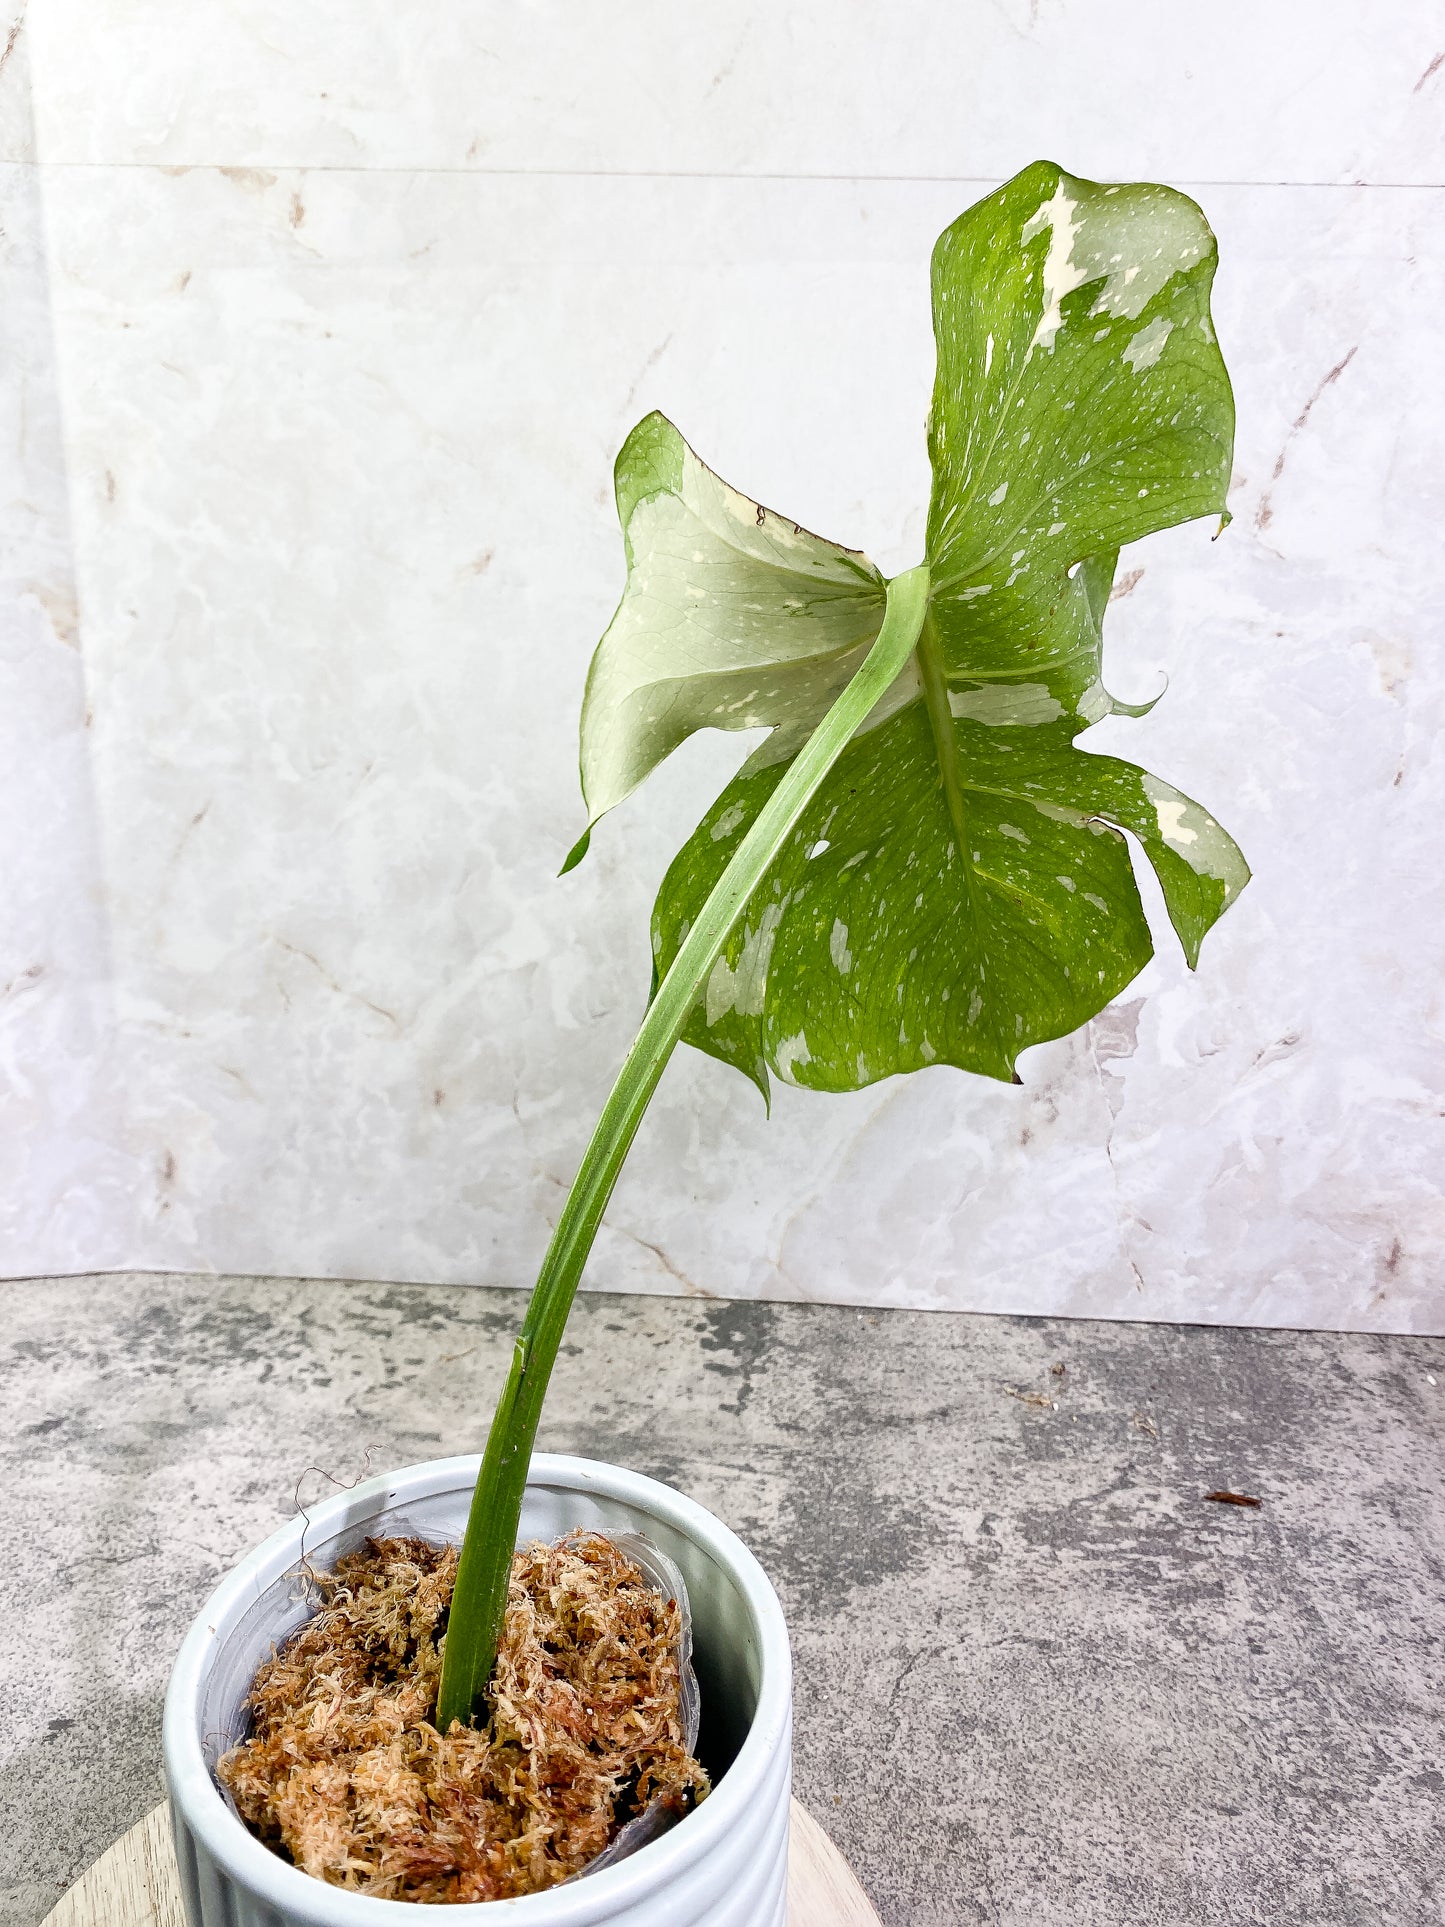 Monstera Thai Constellation 1 leaf Rooting Top Cutting